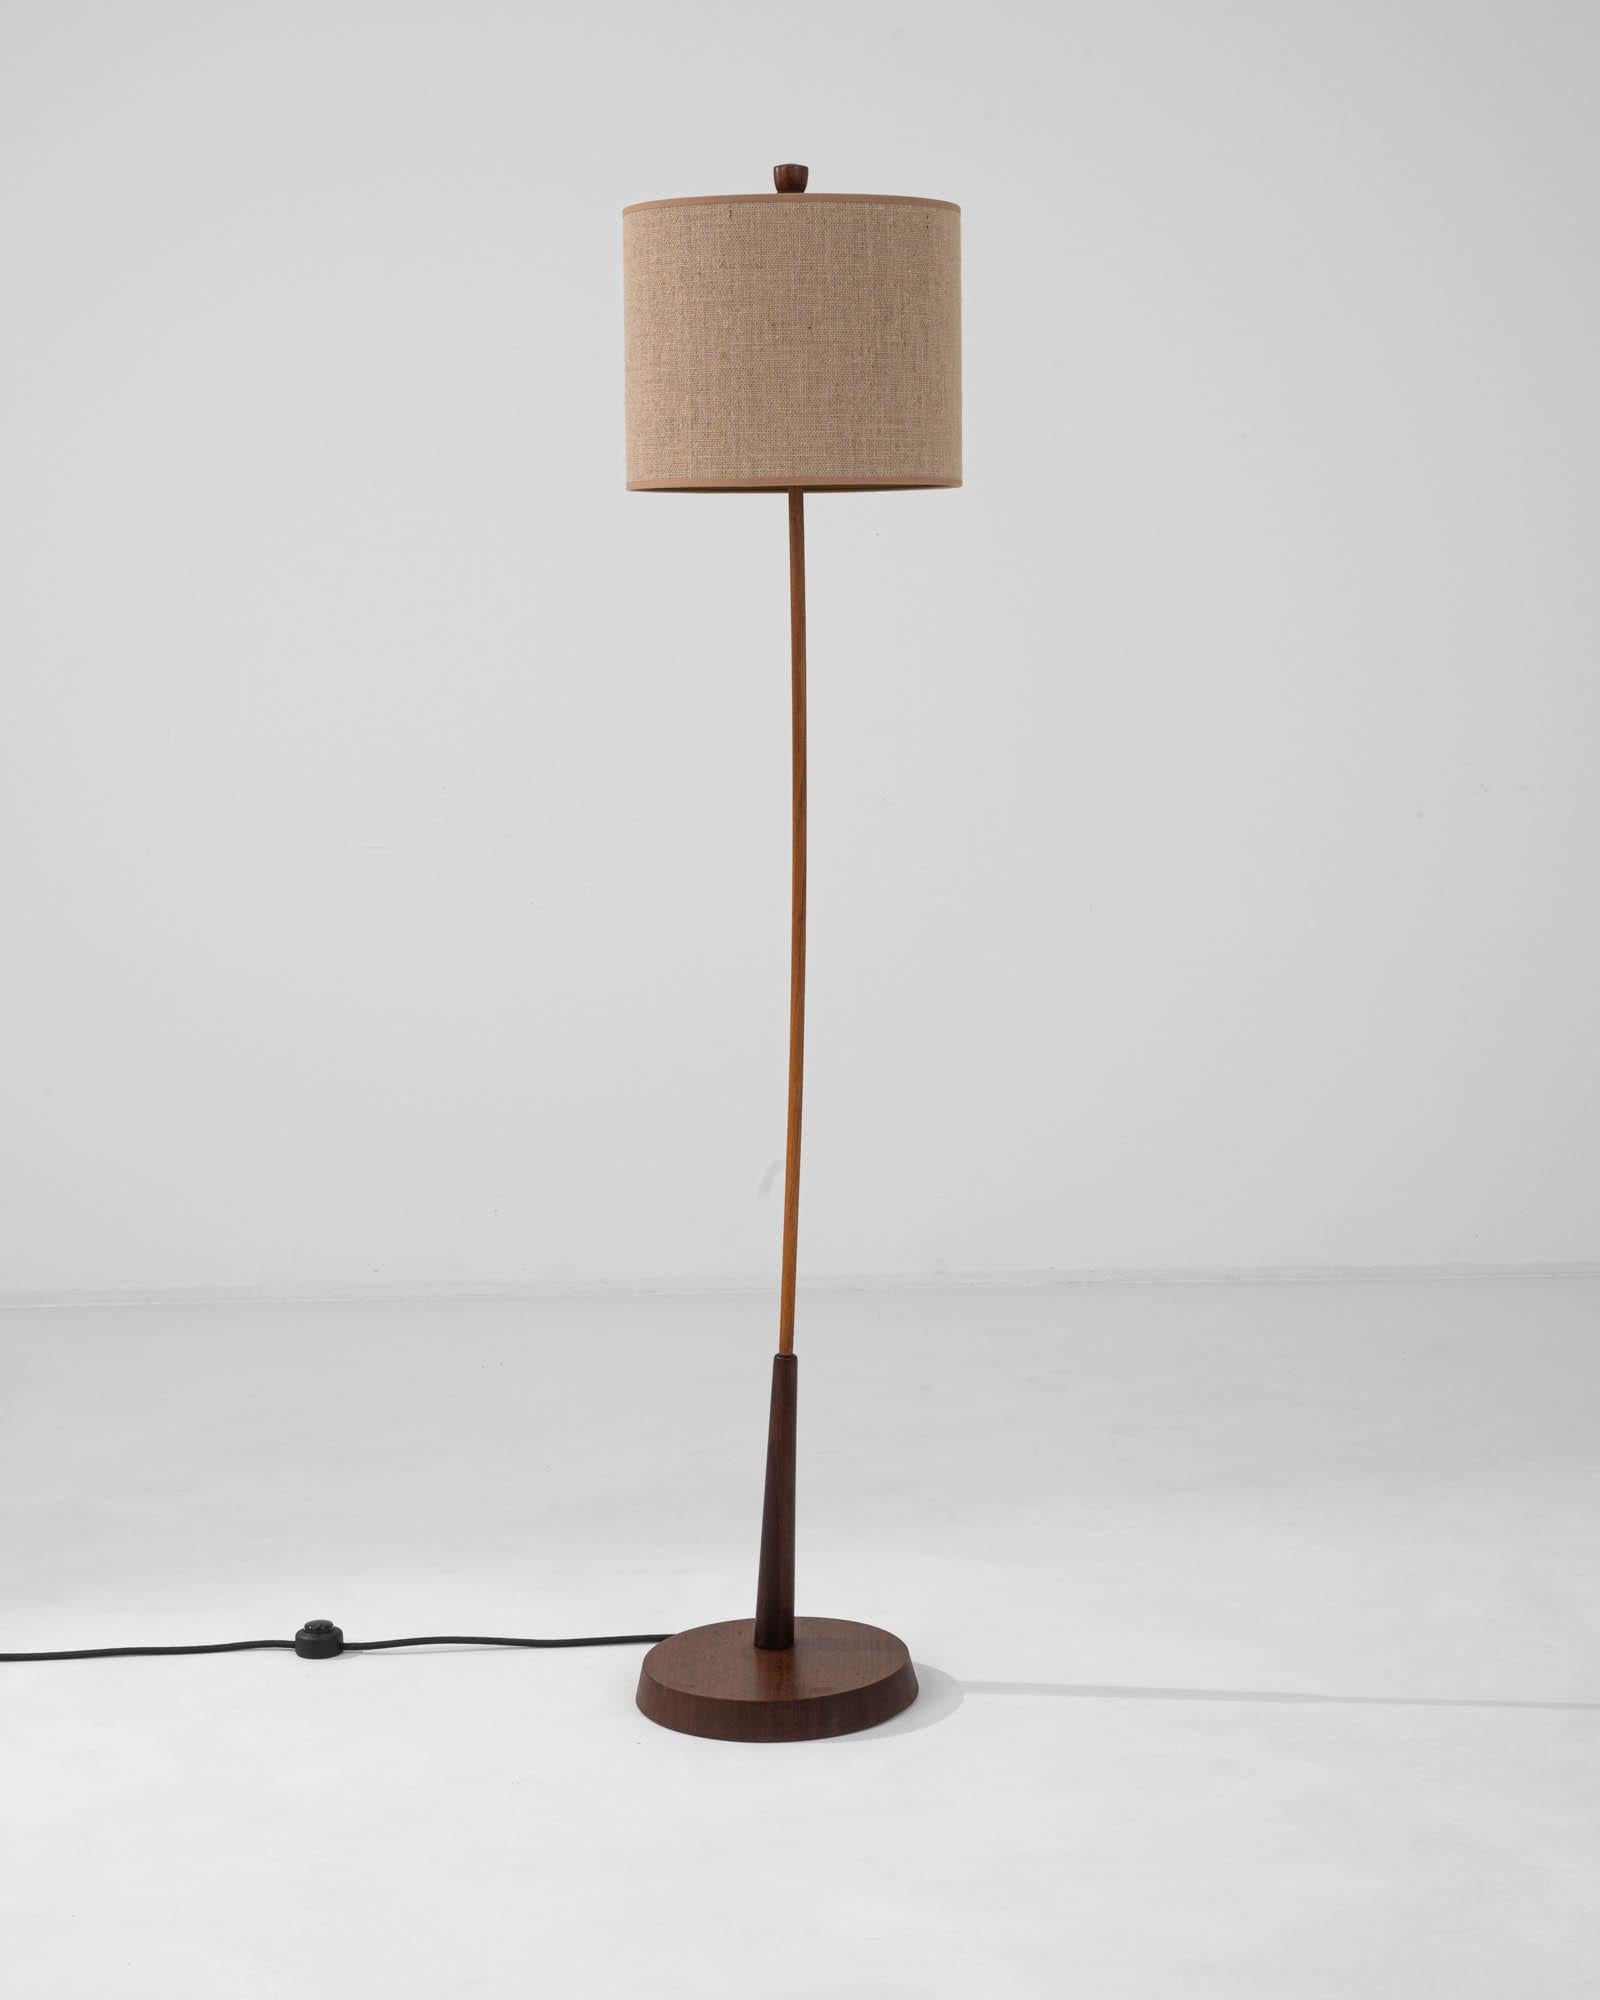 Illuminate your living space with the understated elegance of this 20th Century Danish Wooden Floor Lamp. Meticulously crafted, this lamp stands tall on a foundation of rich, dark-stained wood that highlights the natural beauty of its grain. The